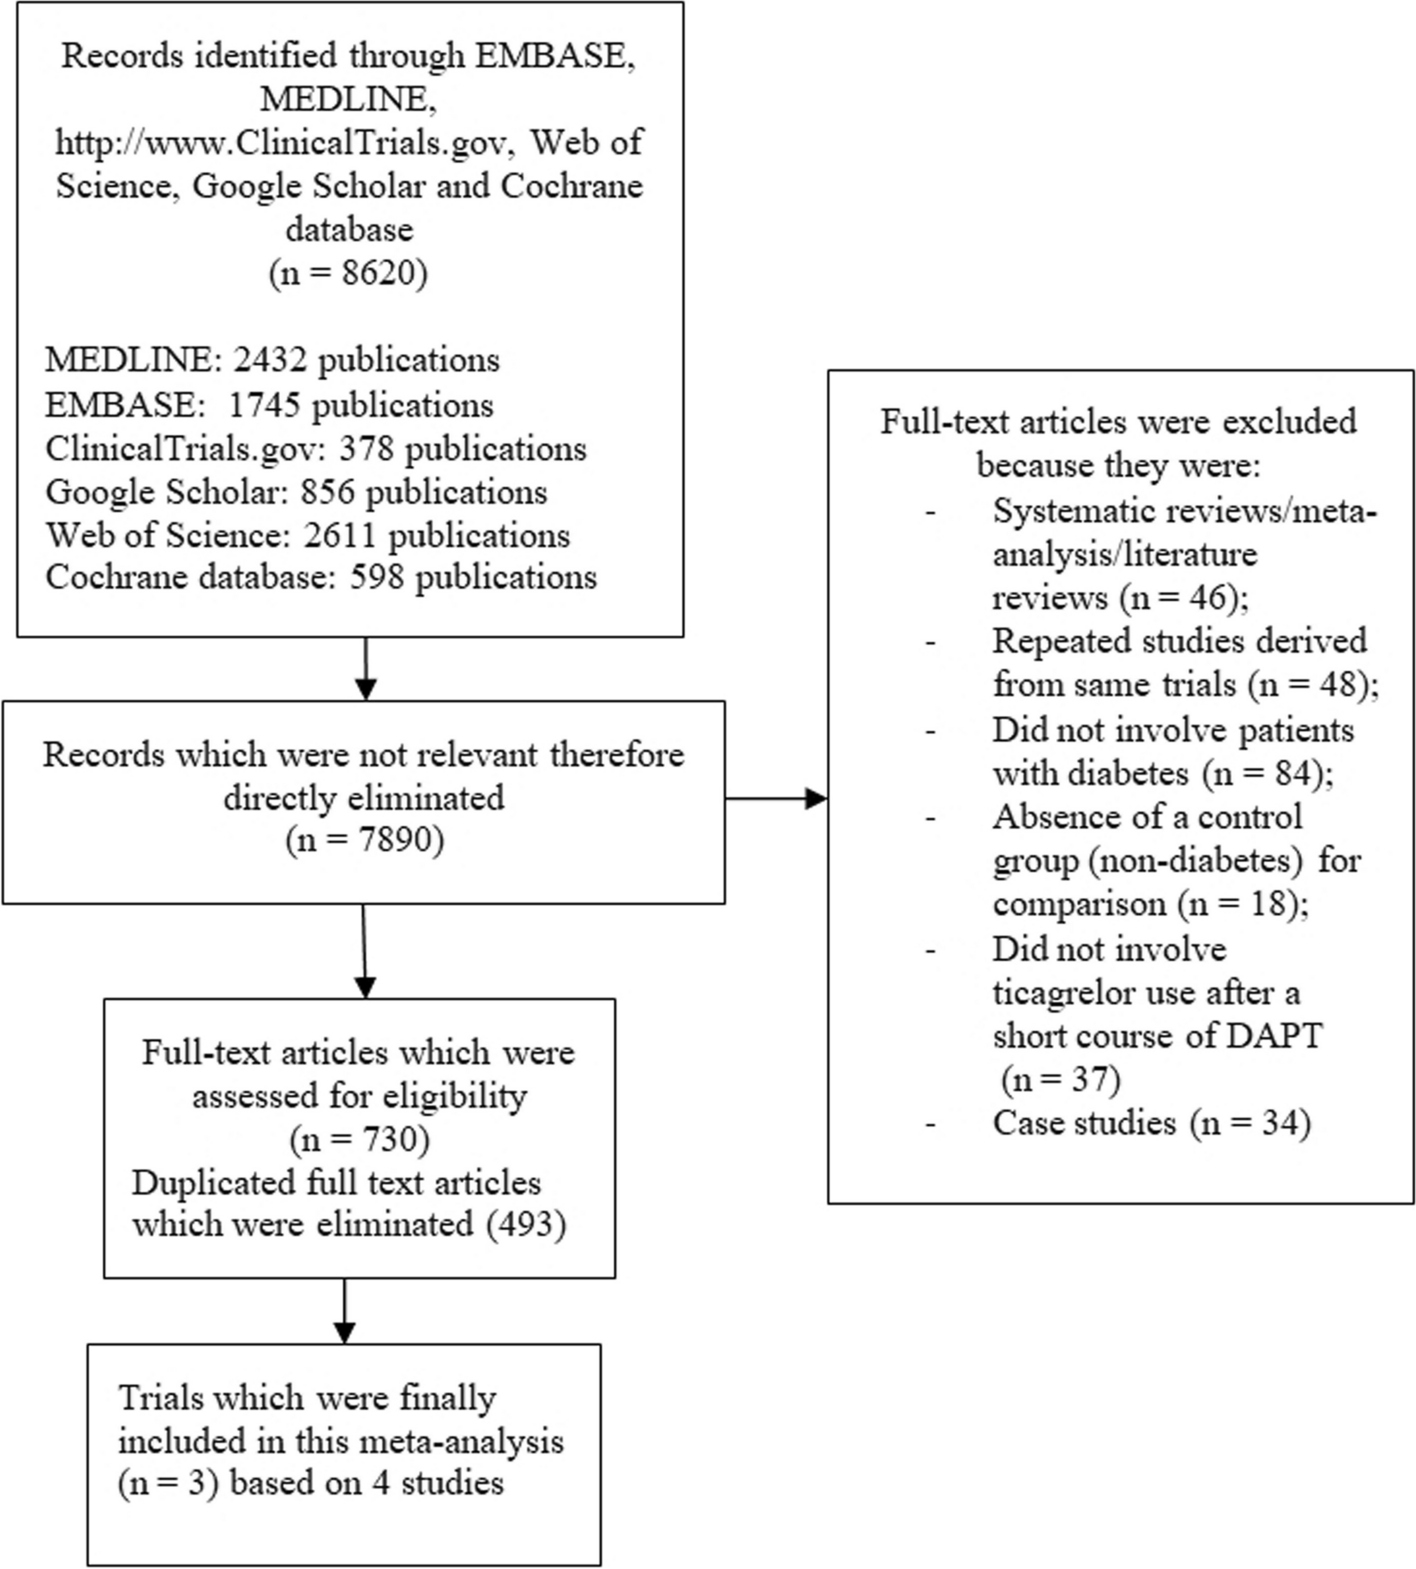 Ticagrelor monotherapy after a short course of dual antiplatelet therapy with ticagrelor plus aspirin following percutaneous coronary intervention in patients with versus without diabetes mellitus: a meta-analysis of randomized trials